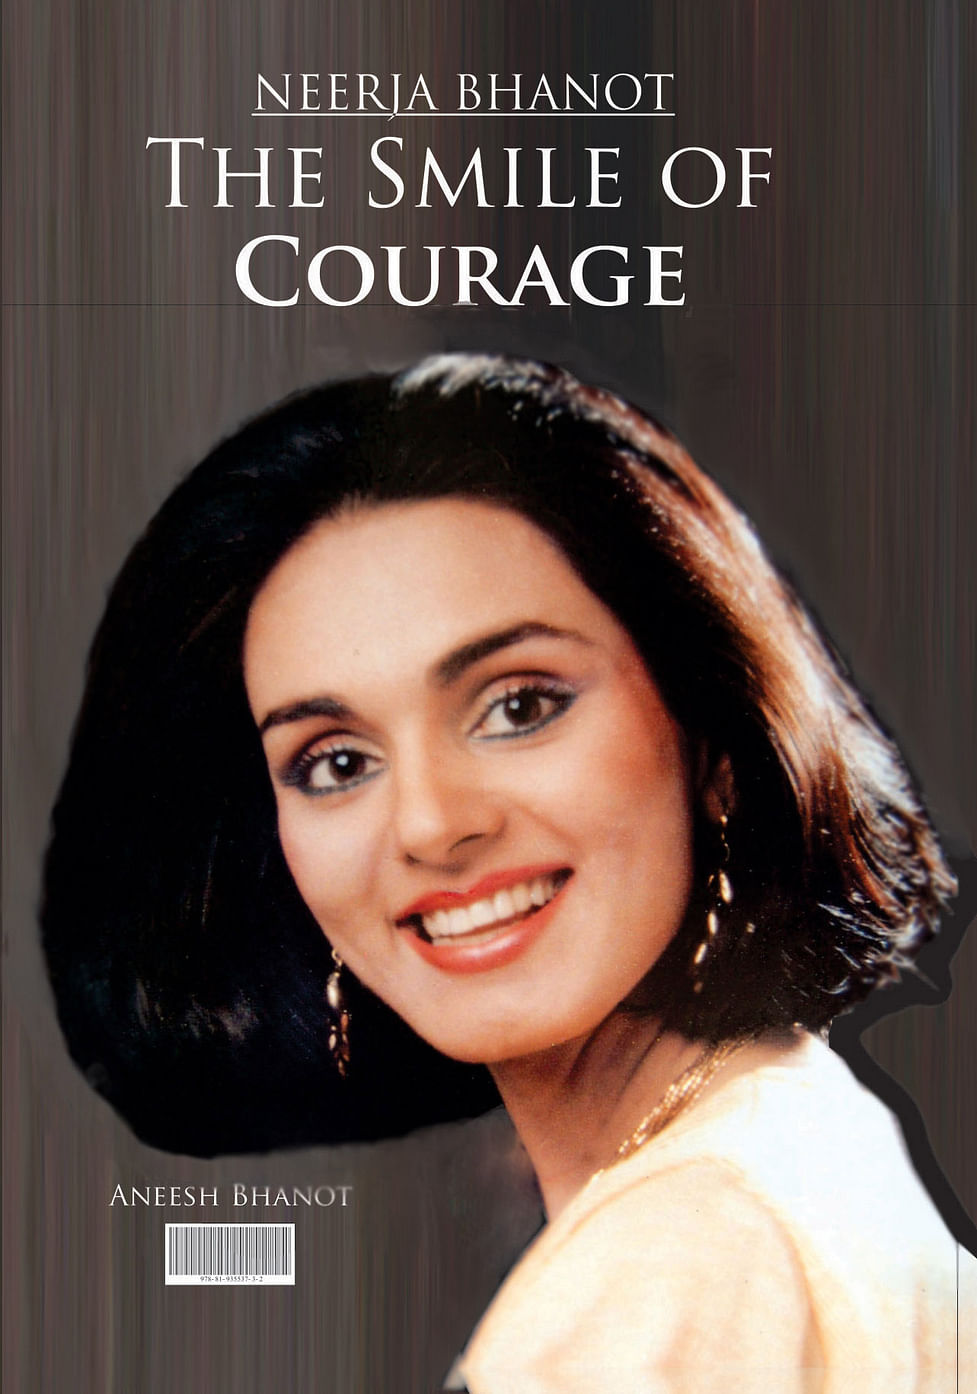 An Incredible Compilation of Over 999 Neerja Bhanot Images in Astonishing 4K Resolution